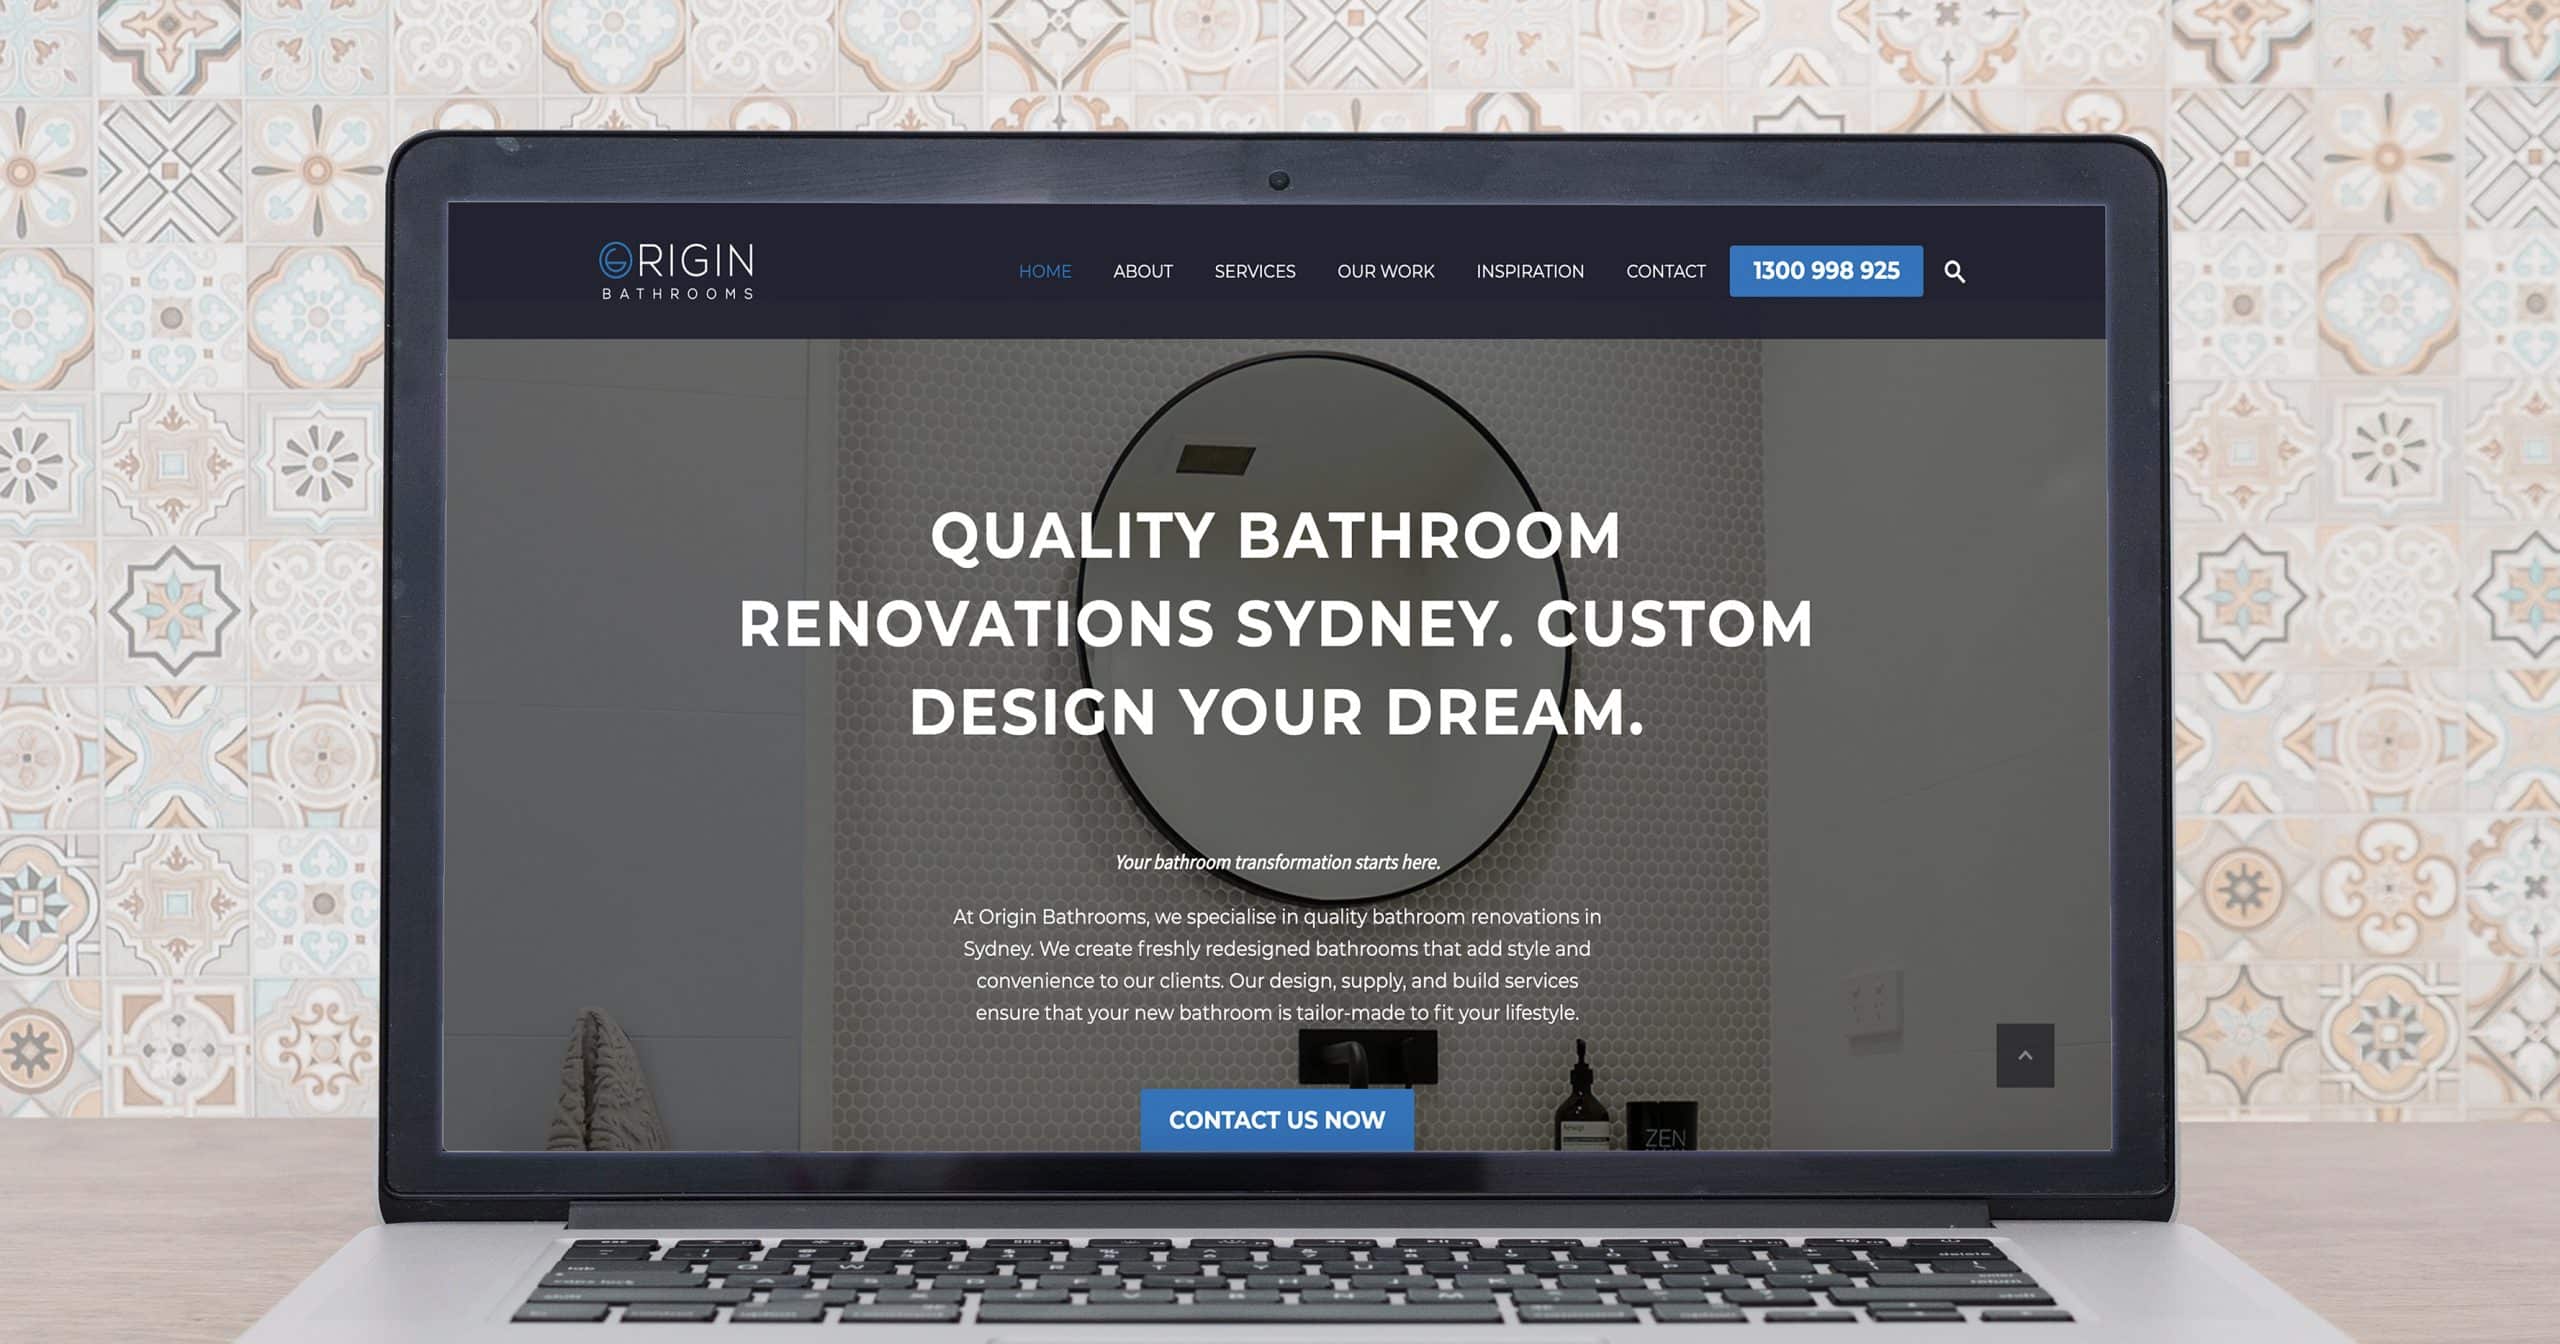 How the Need for SEO Services Turned into a Full Website Overhaul for a Bathroom Design Company